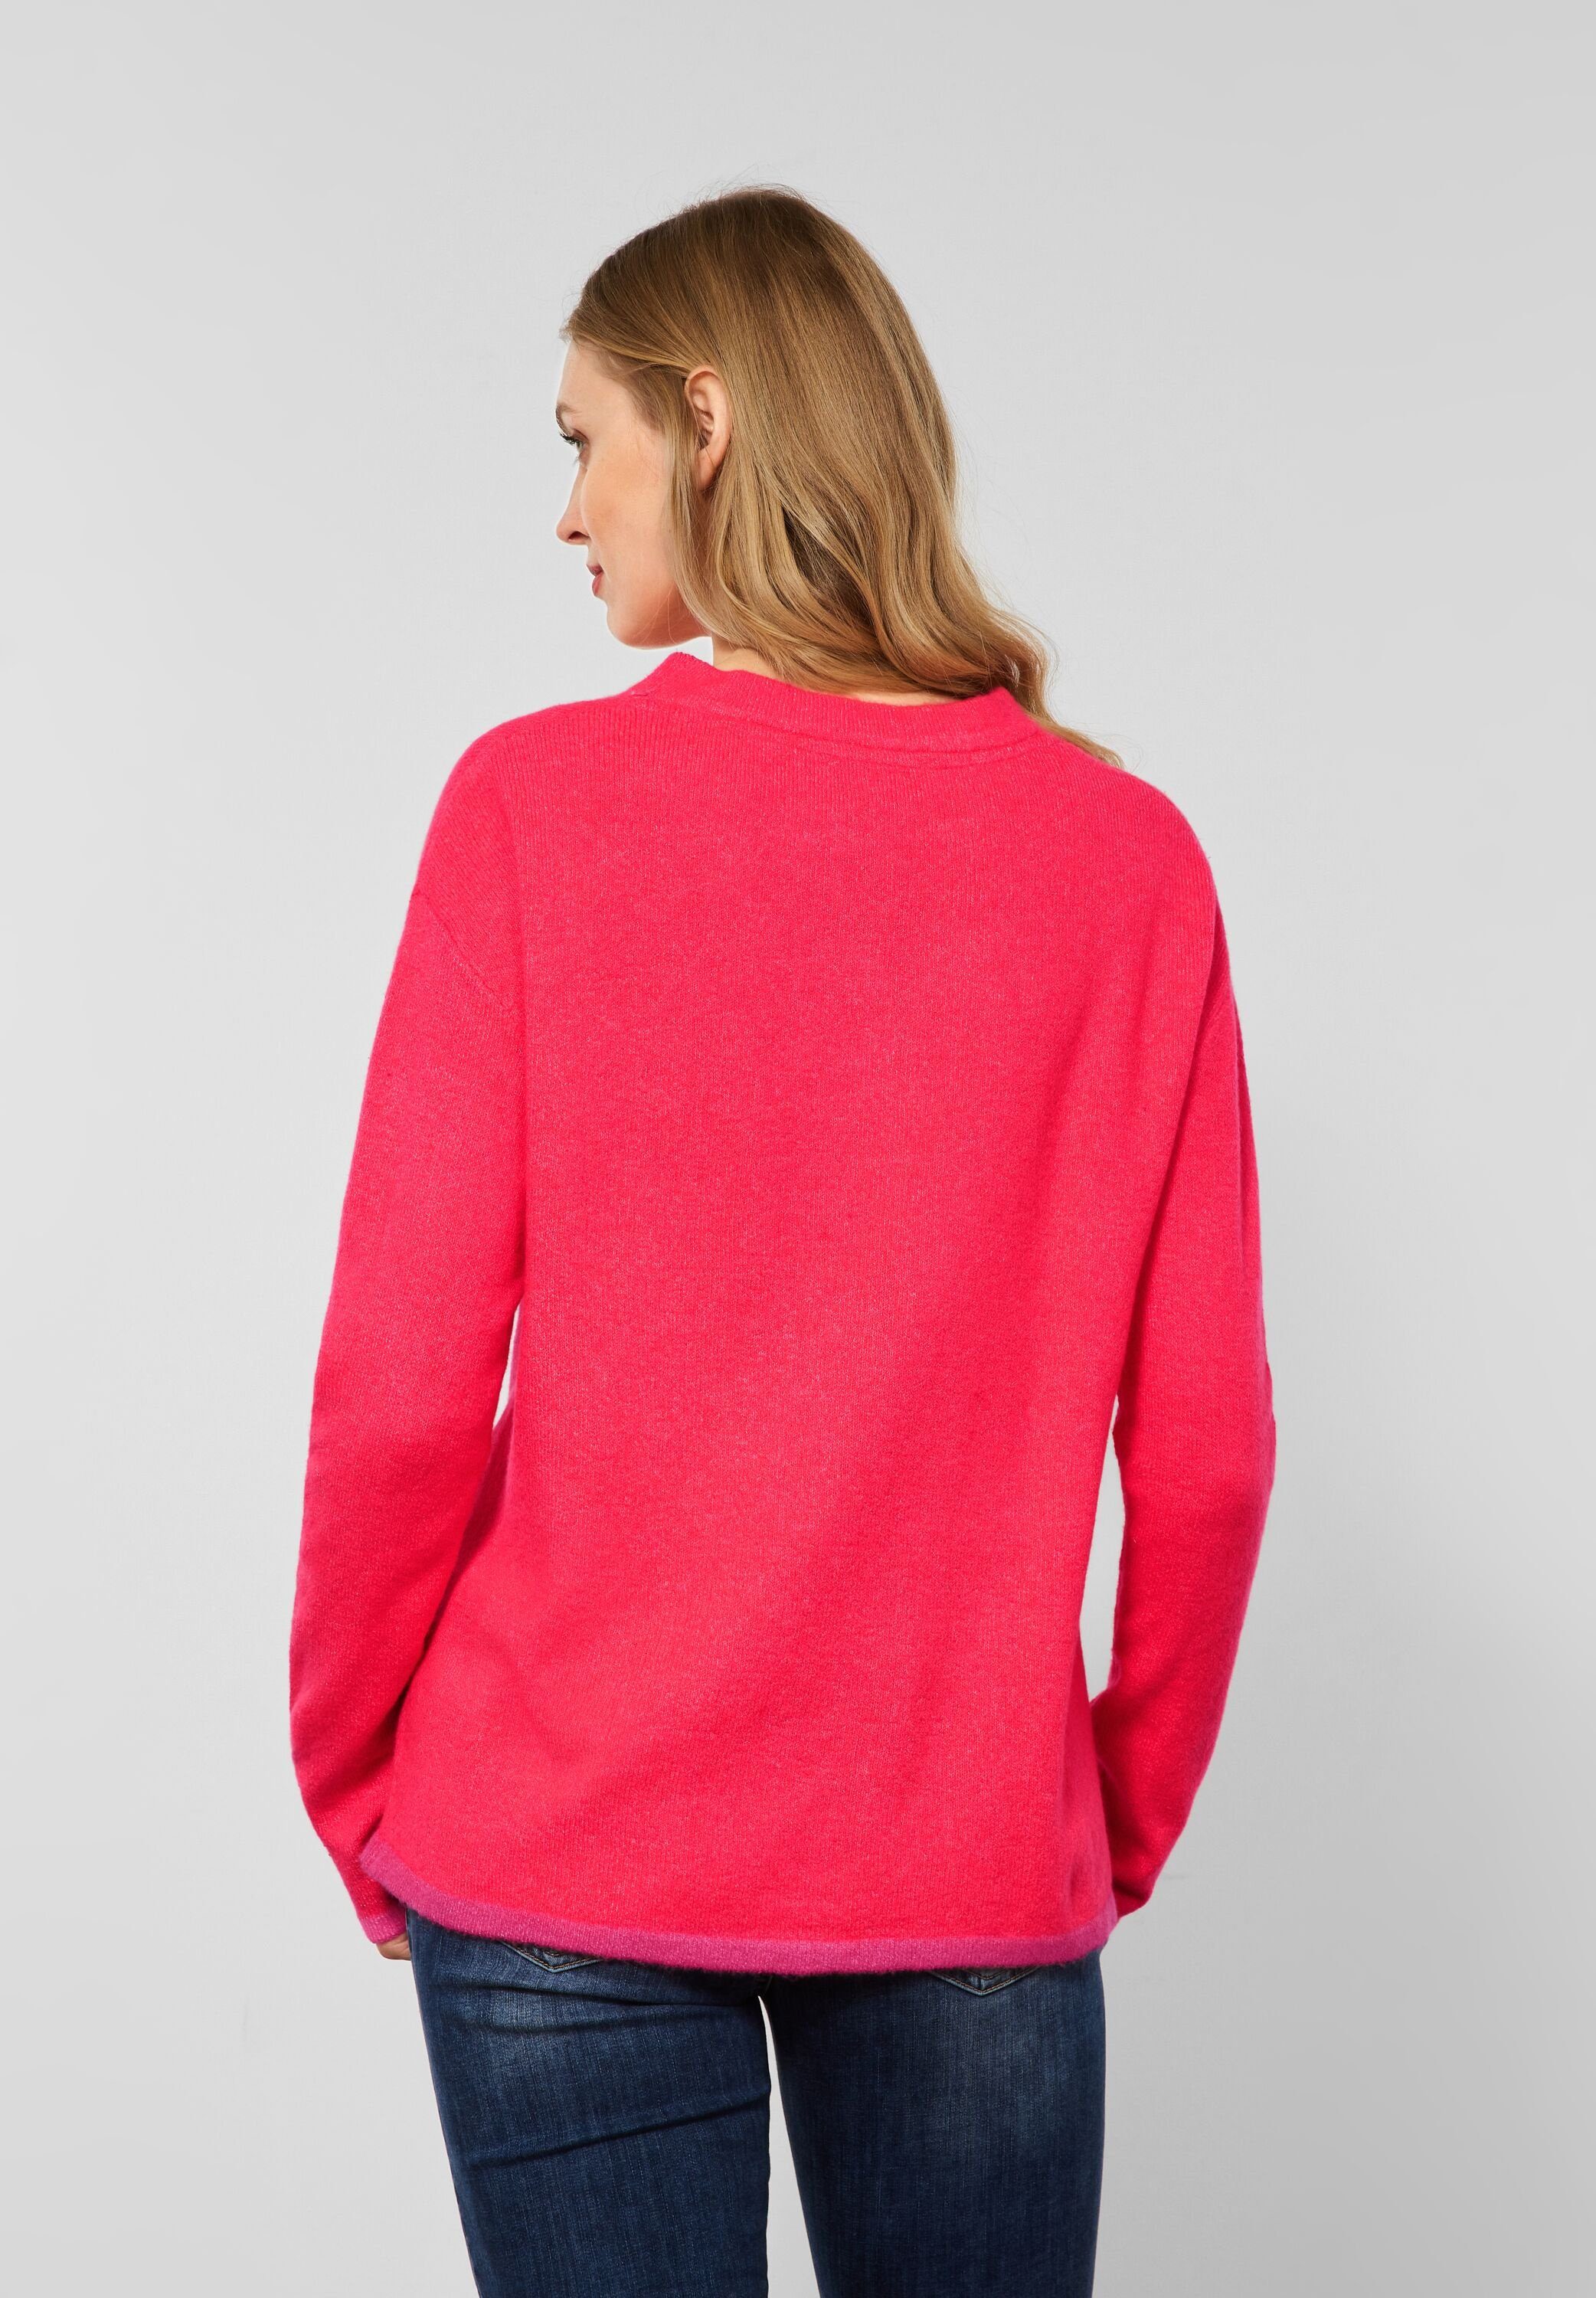 mit STREET showy Pullover coral ONE Strickpullover Farbdetails